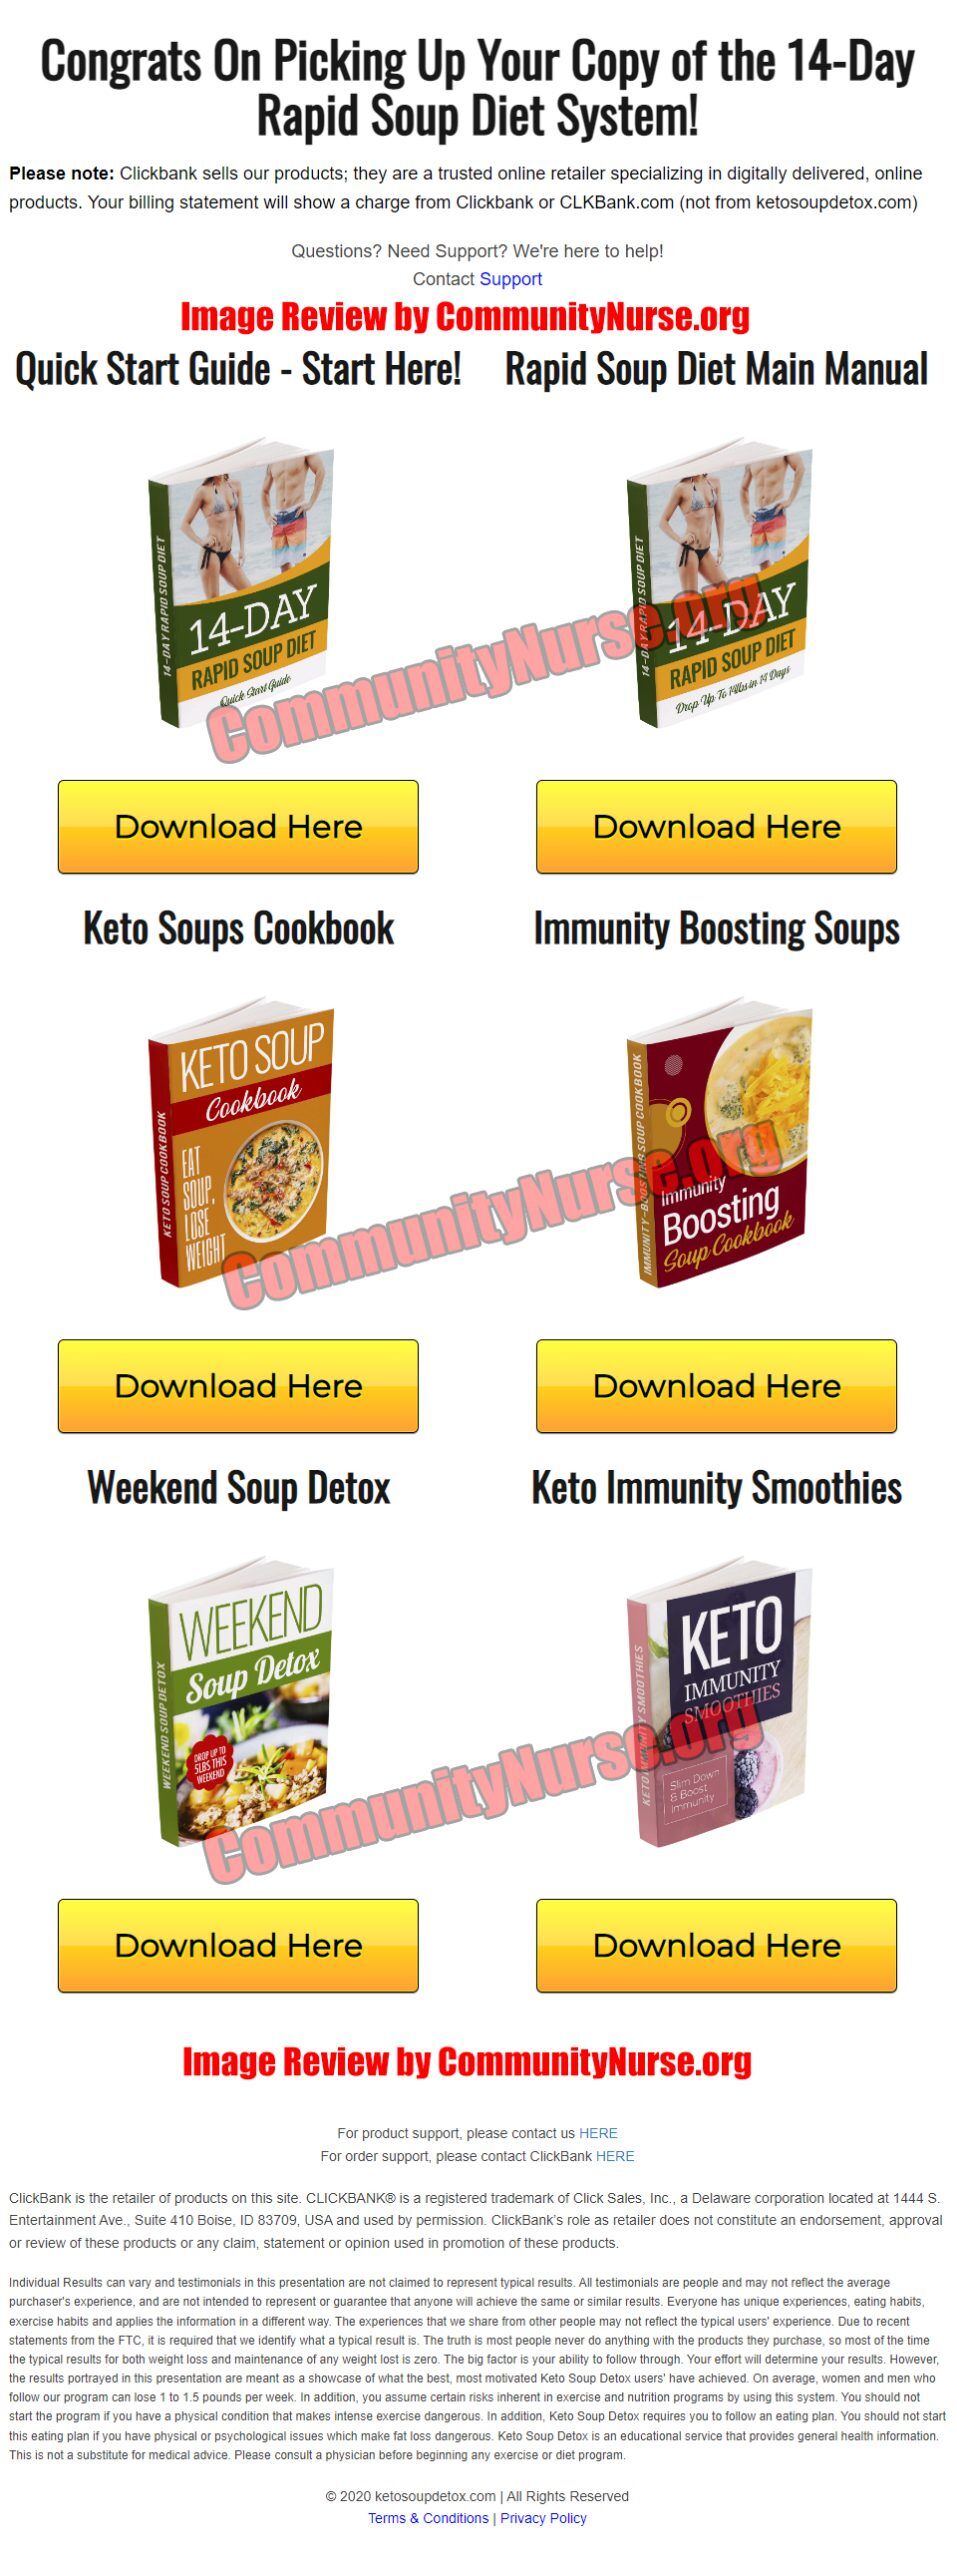 14-day rapid soup diet download page